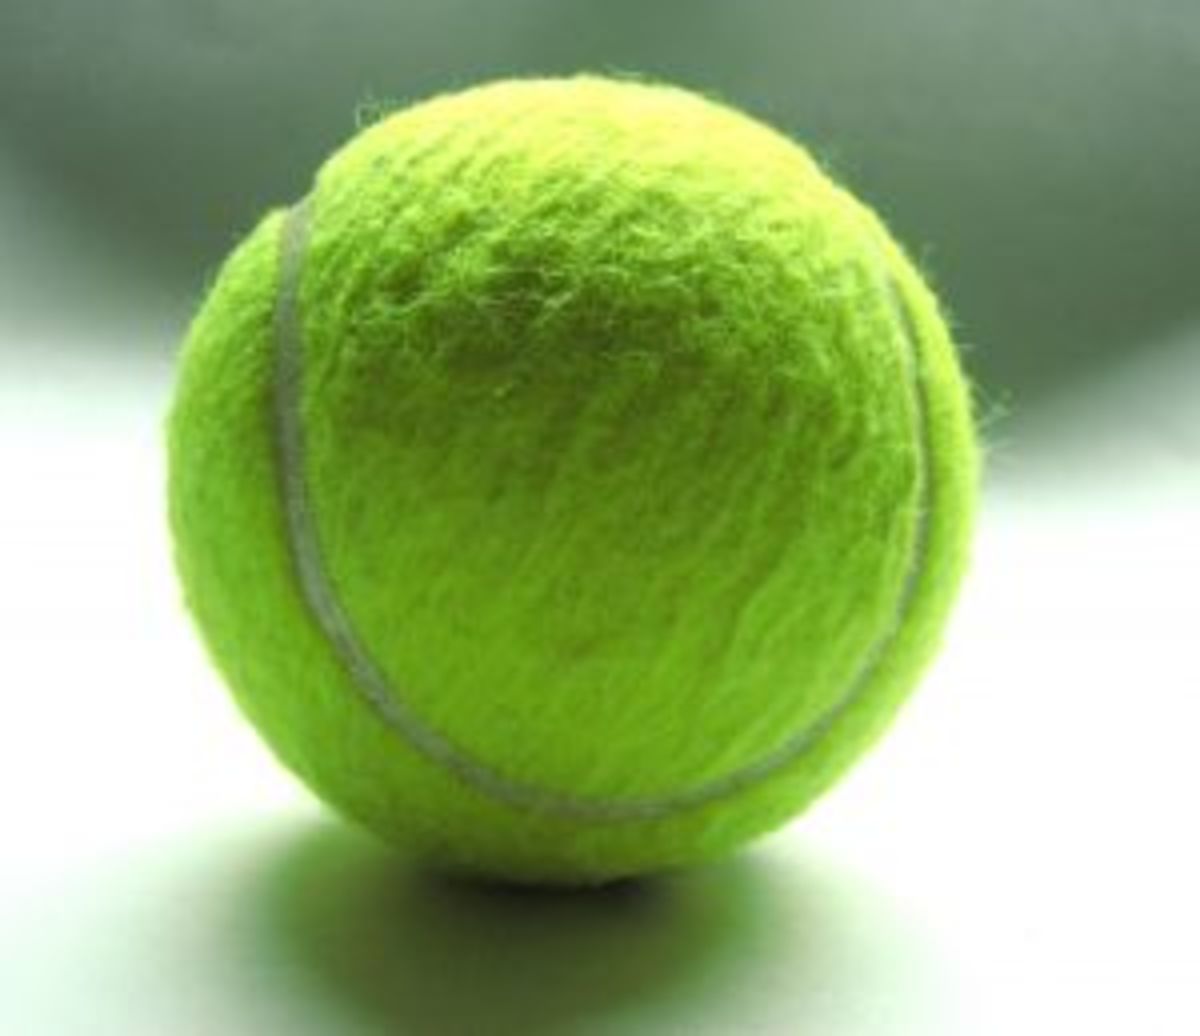 Tennis balls are an excellent natural remedy for snoring.